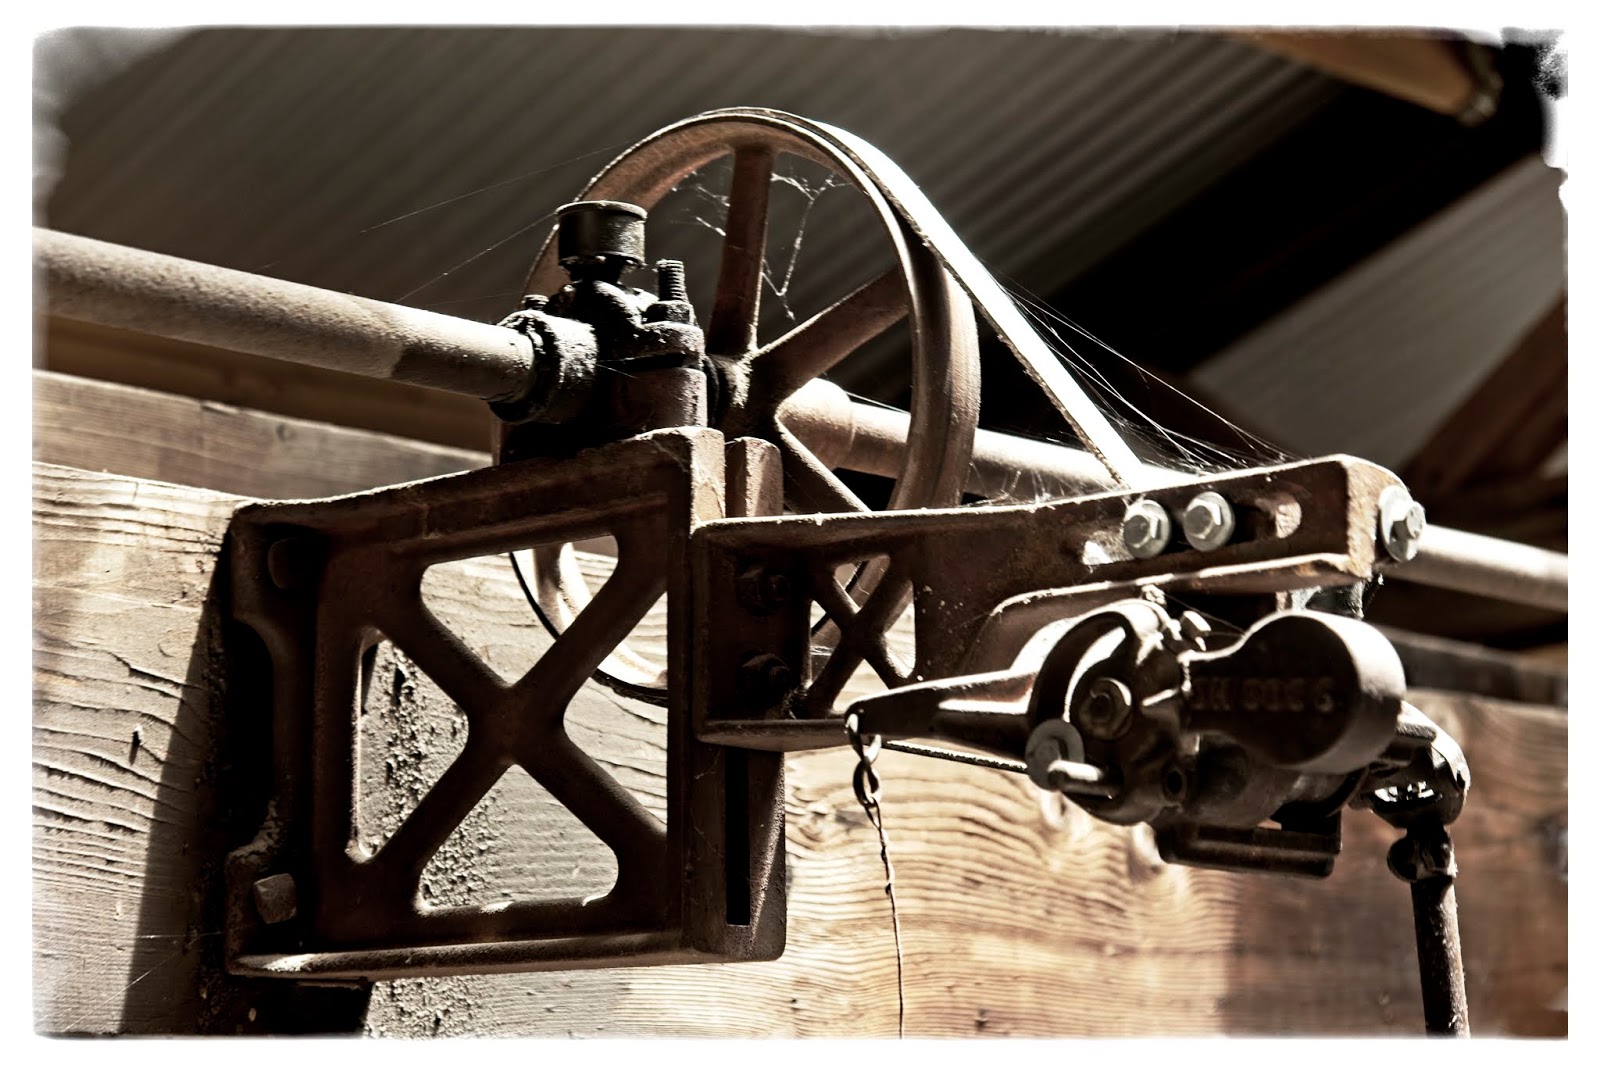 My World in HDR: Antique Equipment